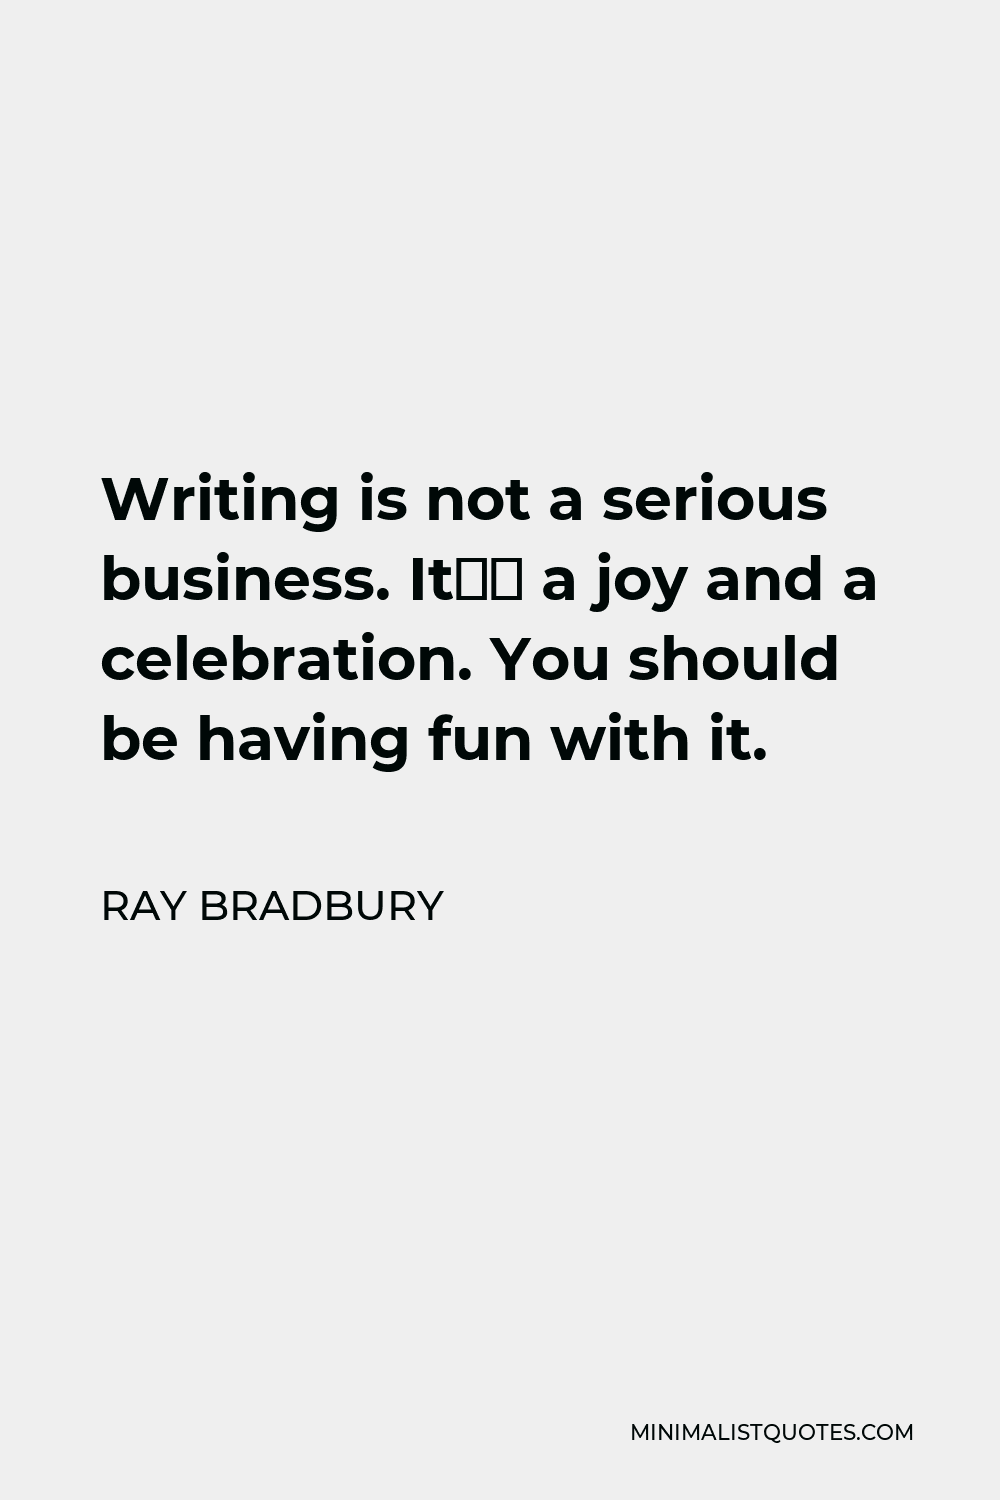 Ray Bradbury Quote - Writing is not a serious business. It’s a joy and a celebration. You should be having fun with it.